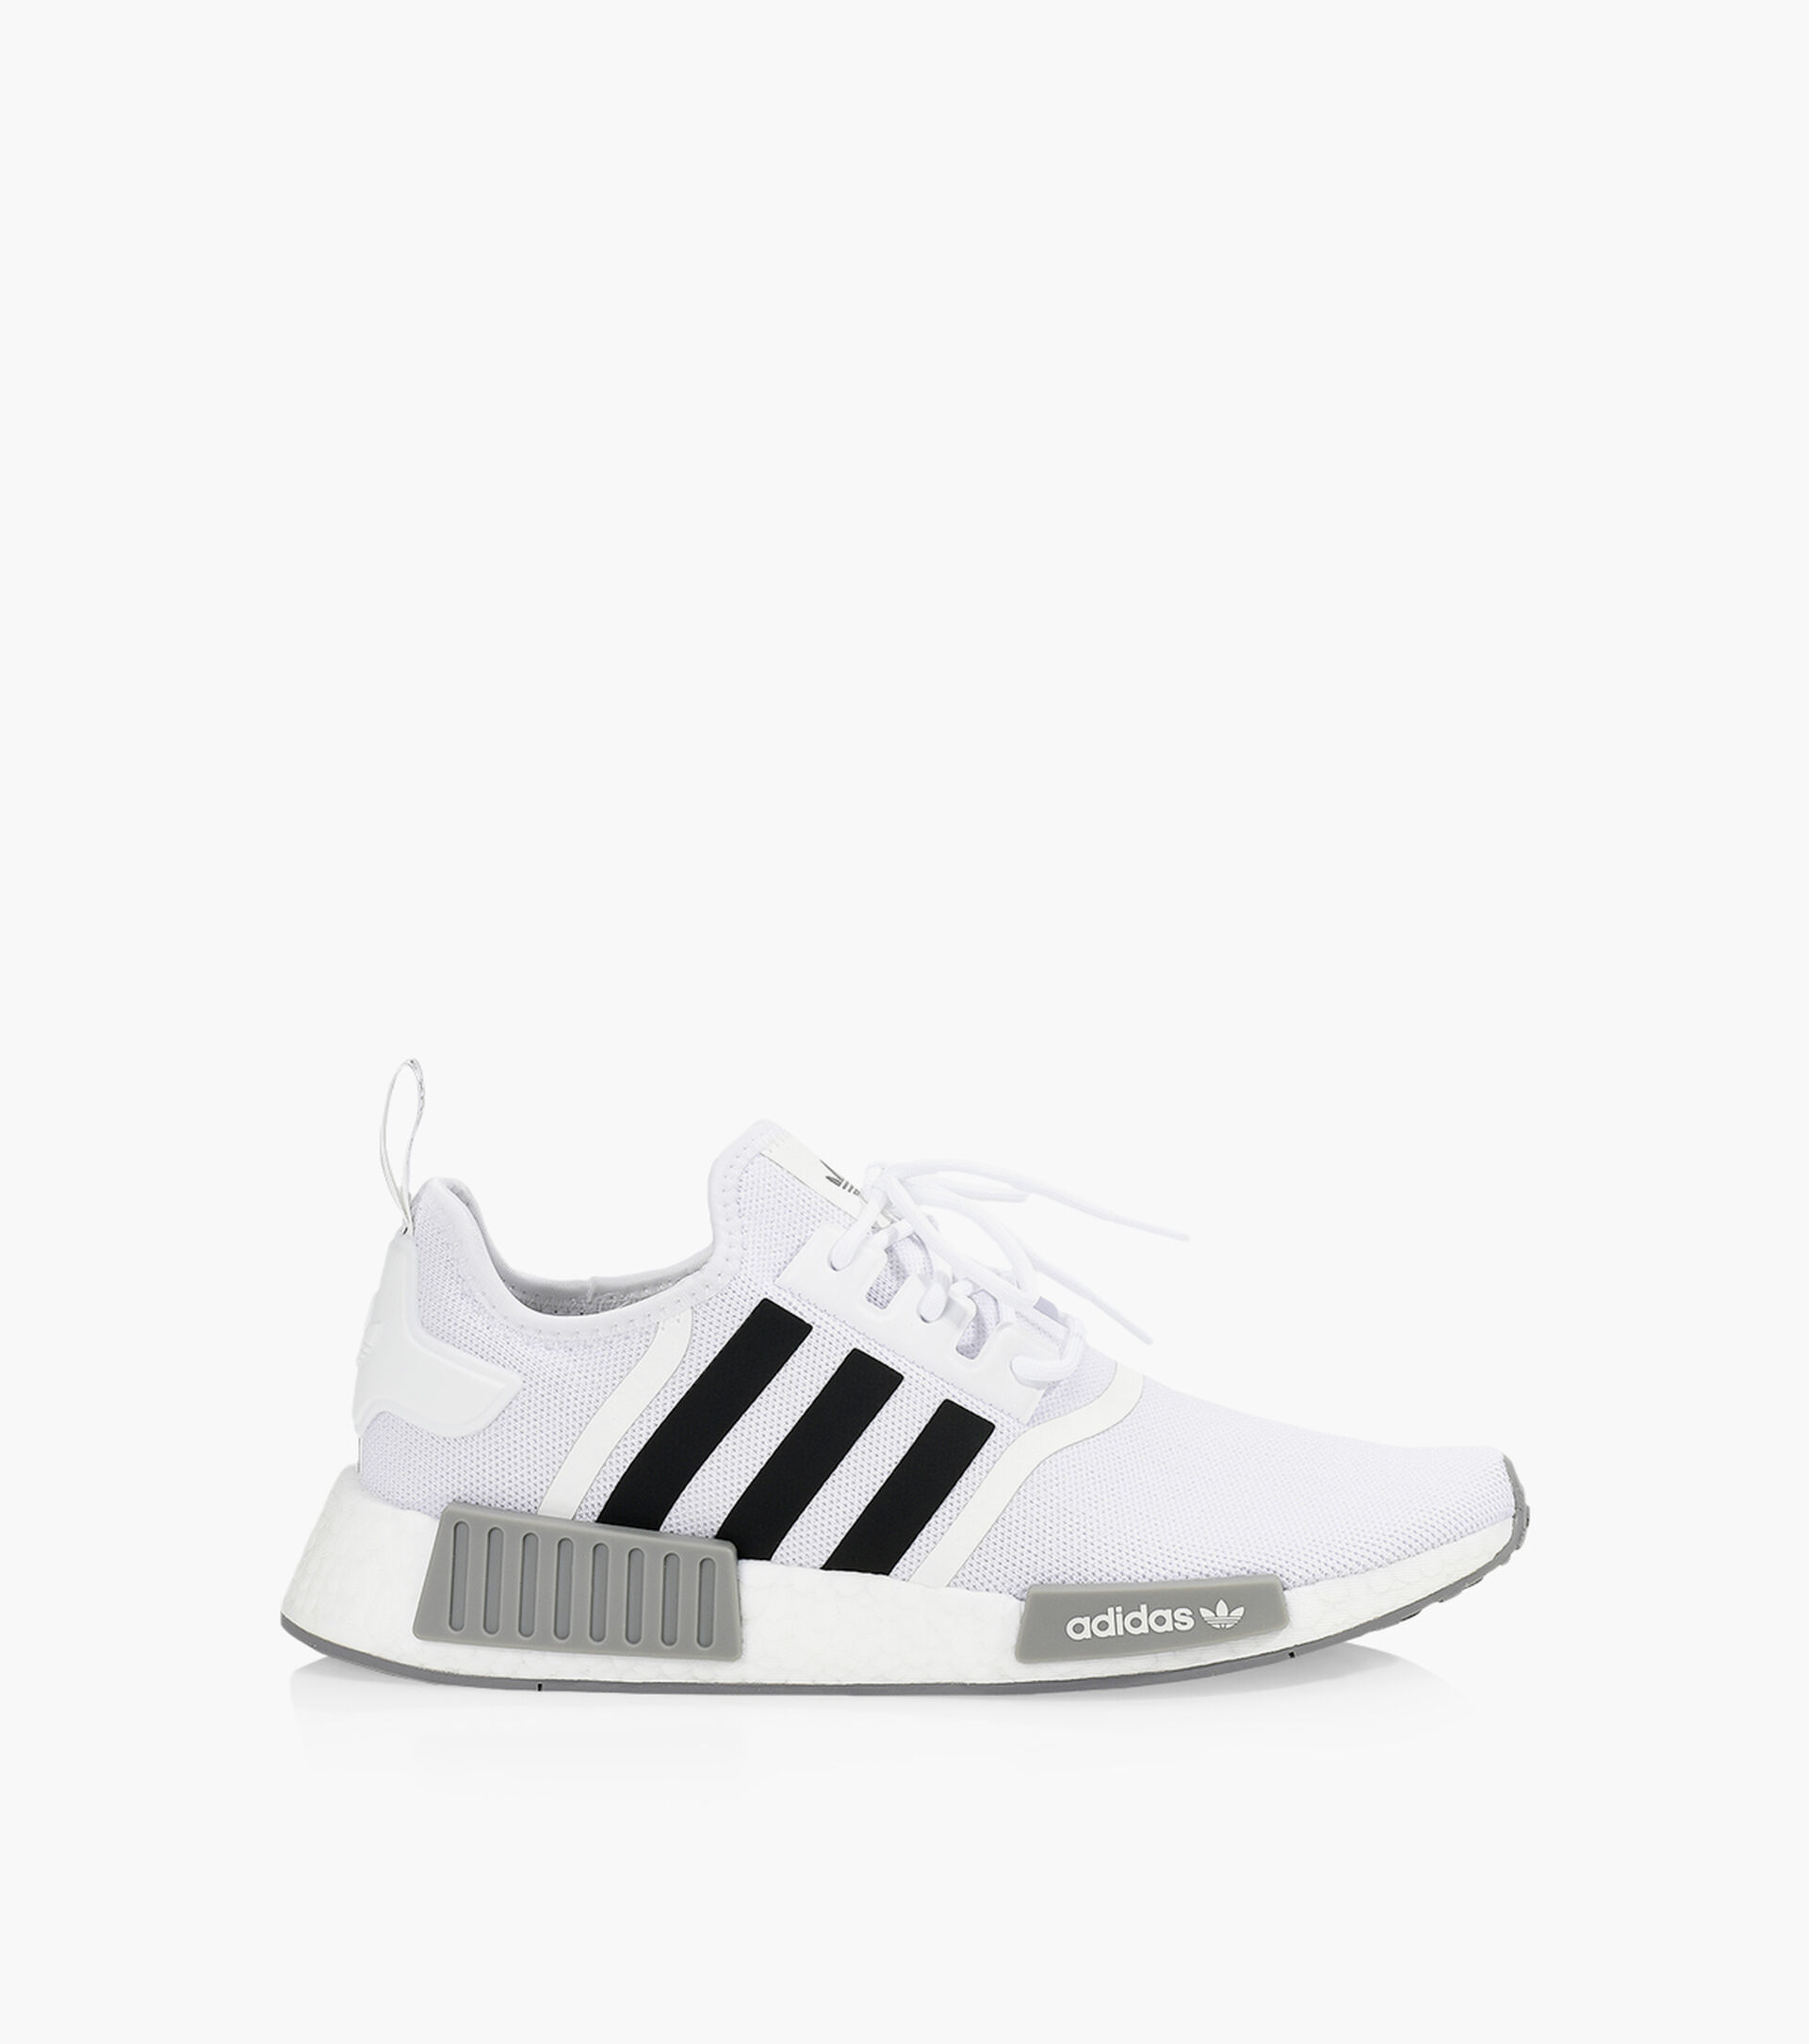 plast plantageejer Sprout Wmns NMD_R1 'White Orchid', 58% OFF | www.udipisupahar.com